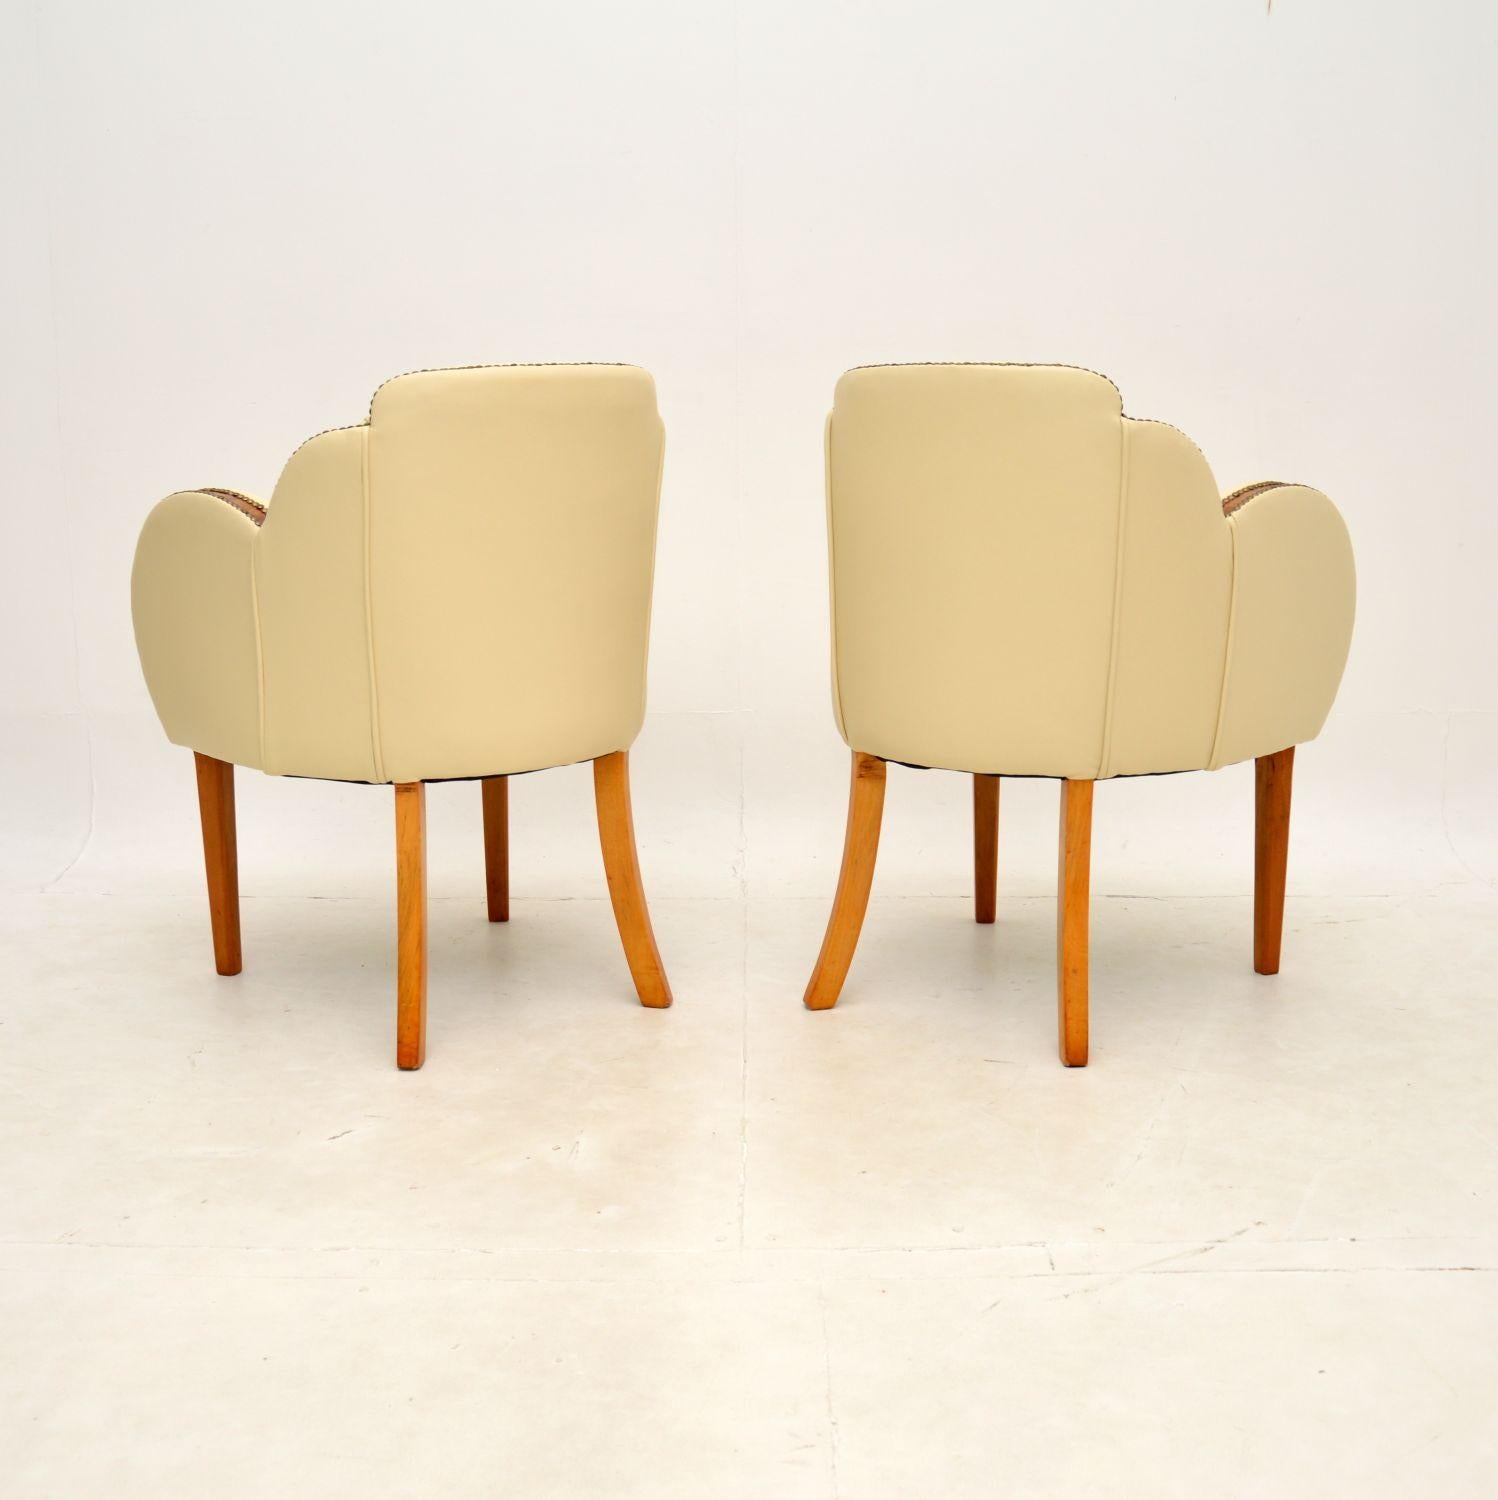 Early 20th Century Pair of Art Deco Walnut and Leather Cloud Back Armchairs by Epstein